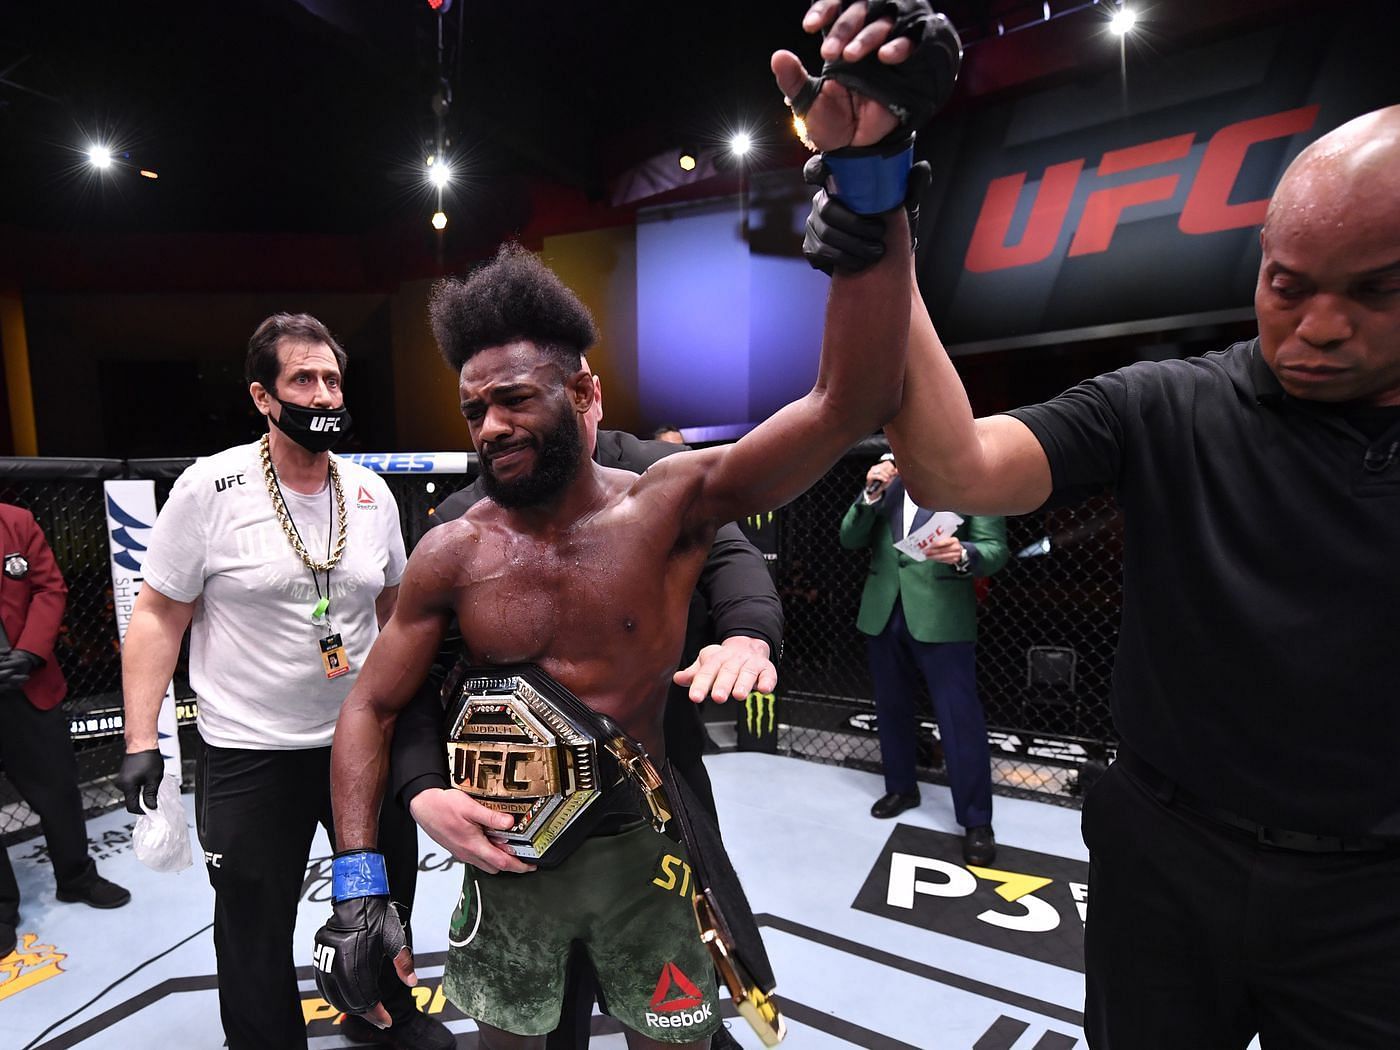 After winning his title in controversial circumstances, can Aljamain Sterling hold onto it in 2022?